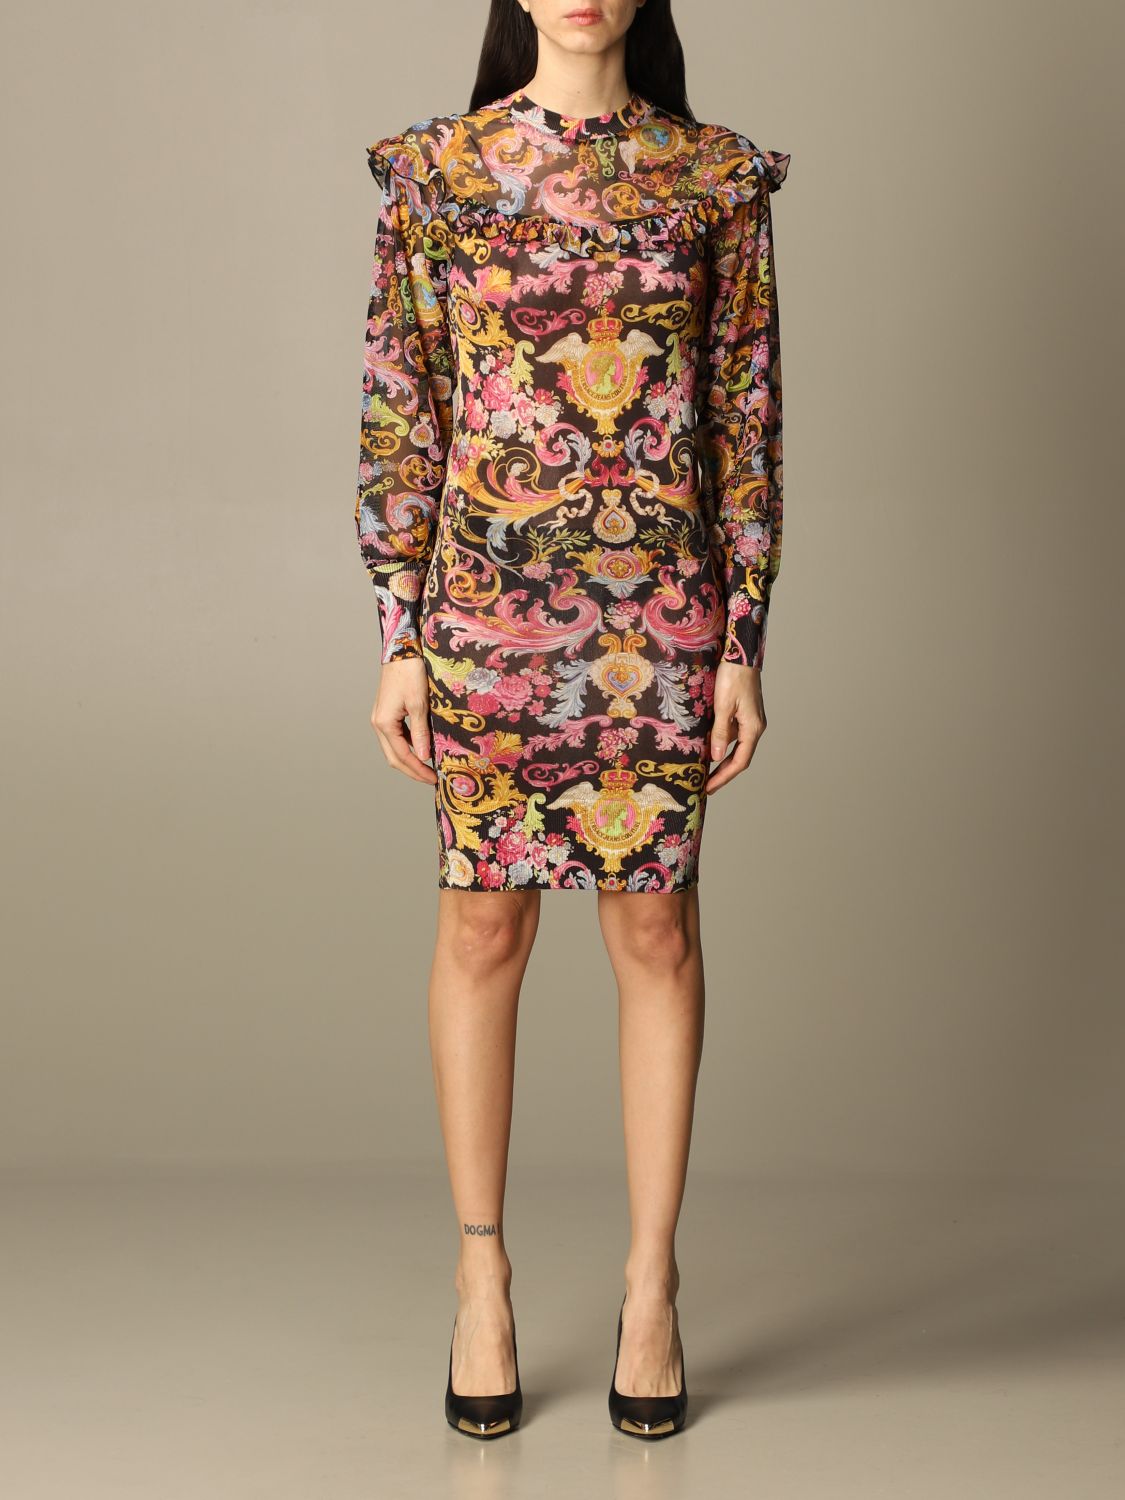 VERSACE JEANS COUTURE: dress with baroque / floral pattern - Black ...